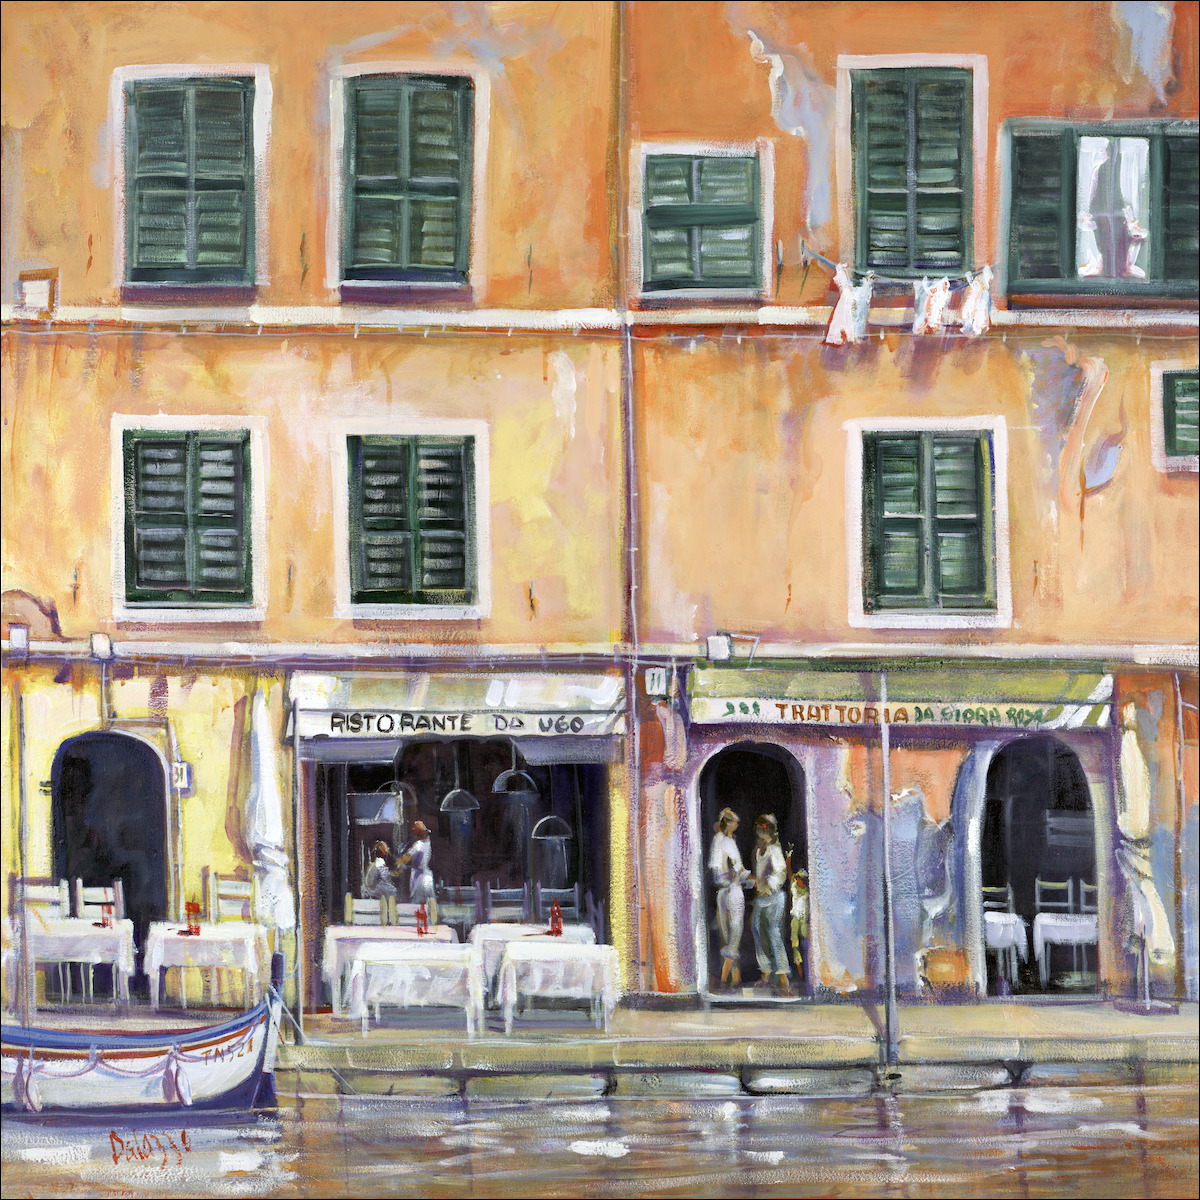 Cityscape "A Taste of Italy" Sienna Variant From Lucette Dalozzo Artwork